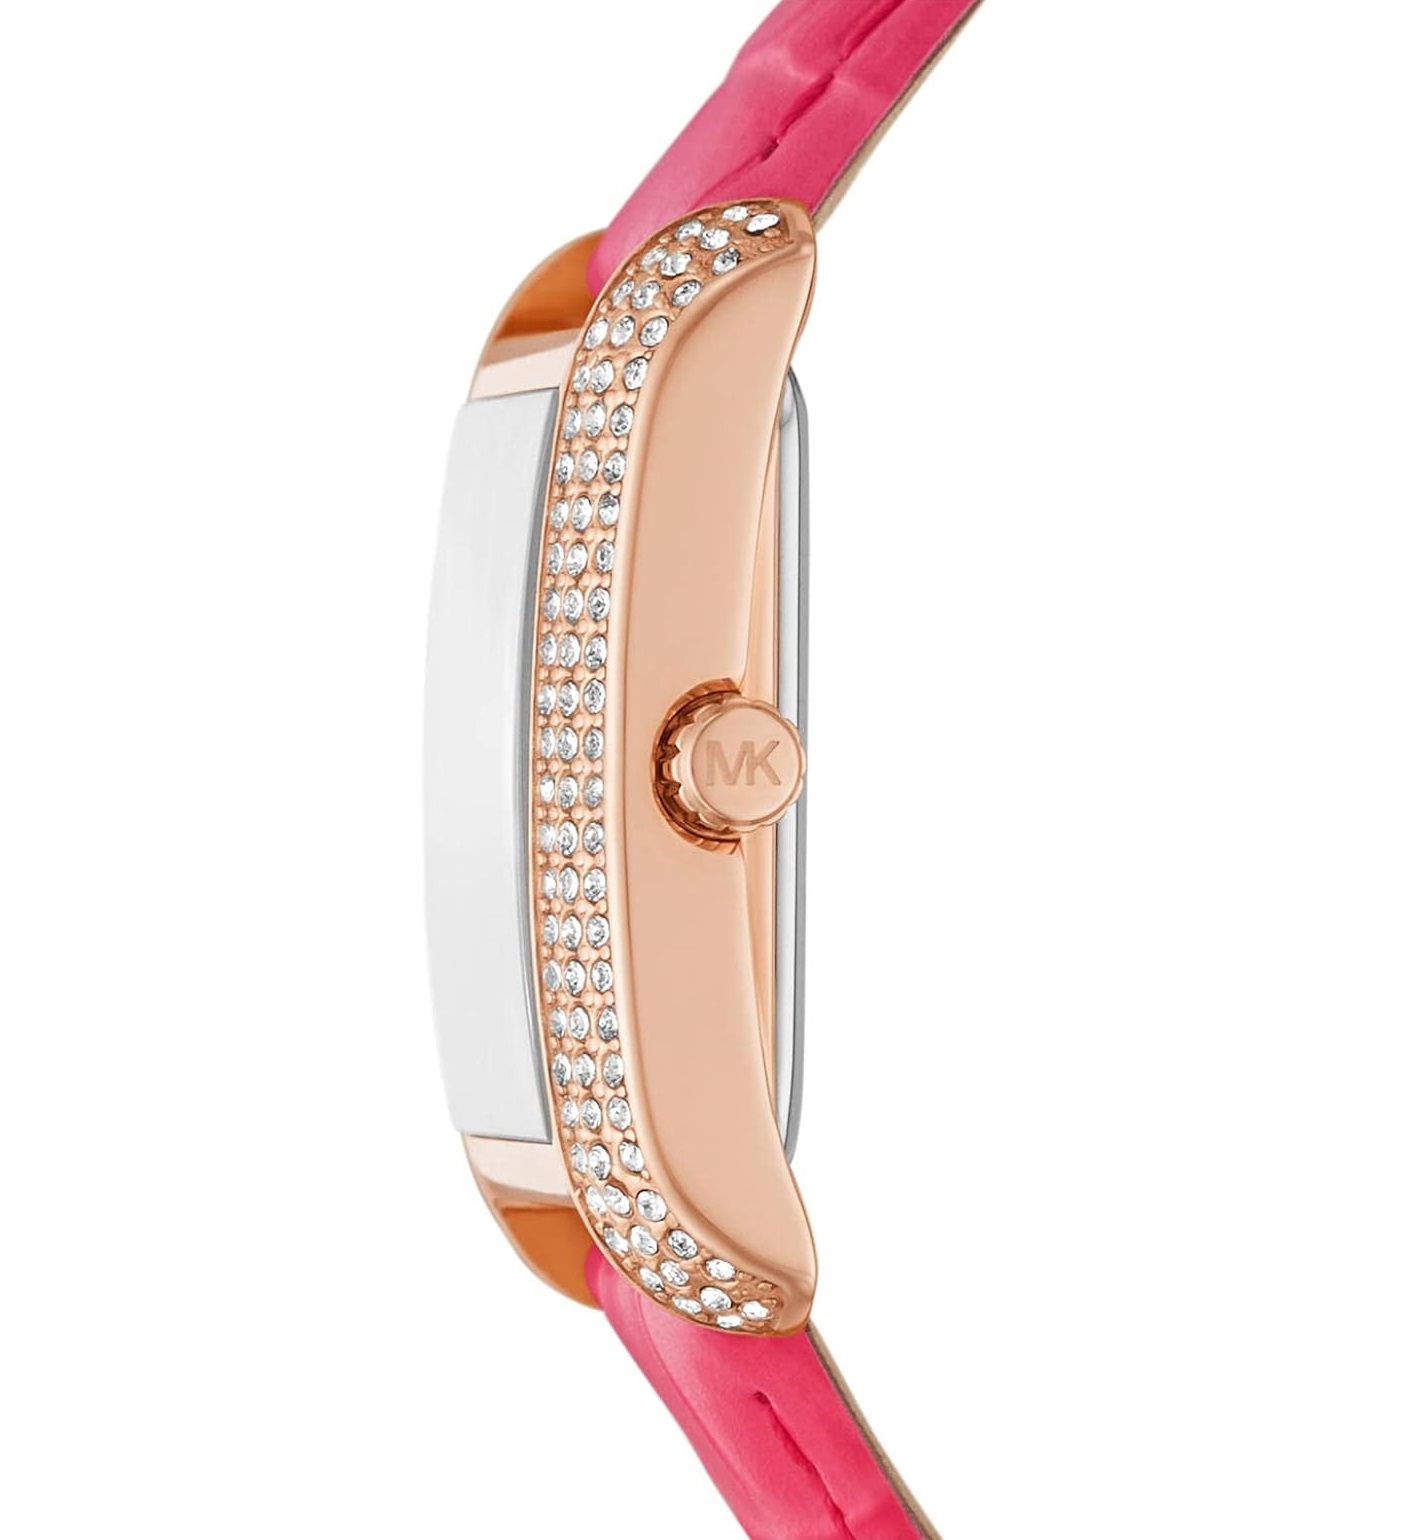 ĐỒNG HỒ ĐEO TAY DÂY DA MK NỮ MICHAEL KORS EMERY PAVÉ ROSE GOLD-TONE AND CROCODILE EMBOSSED LEATHER WATCH MK2984 4